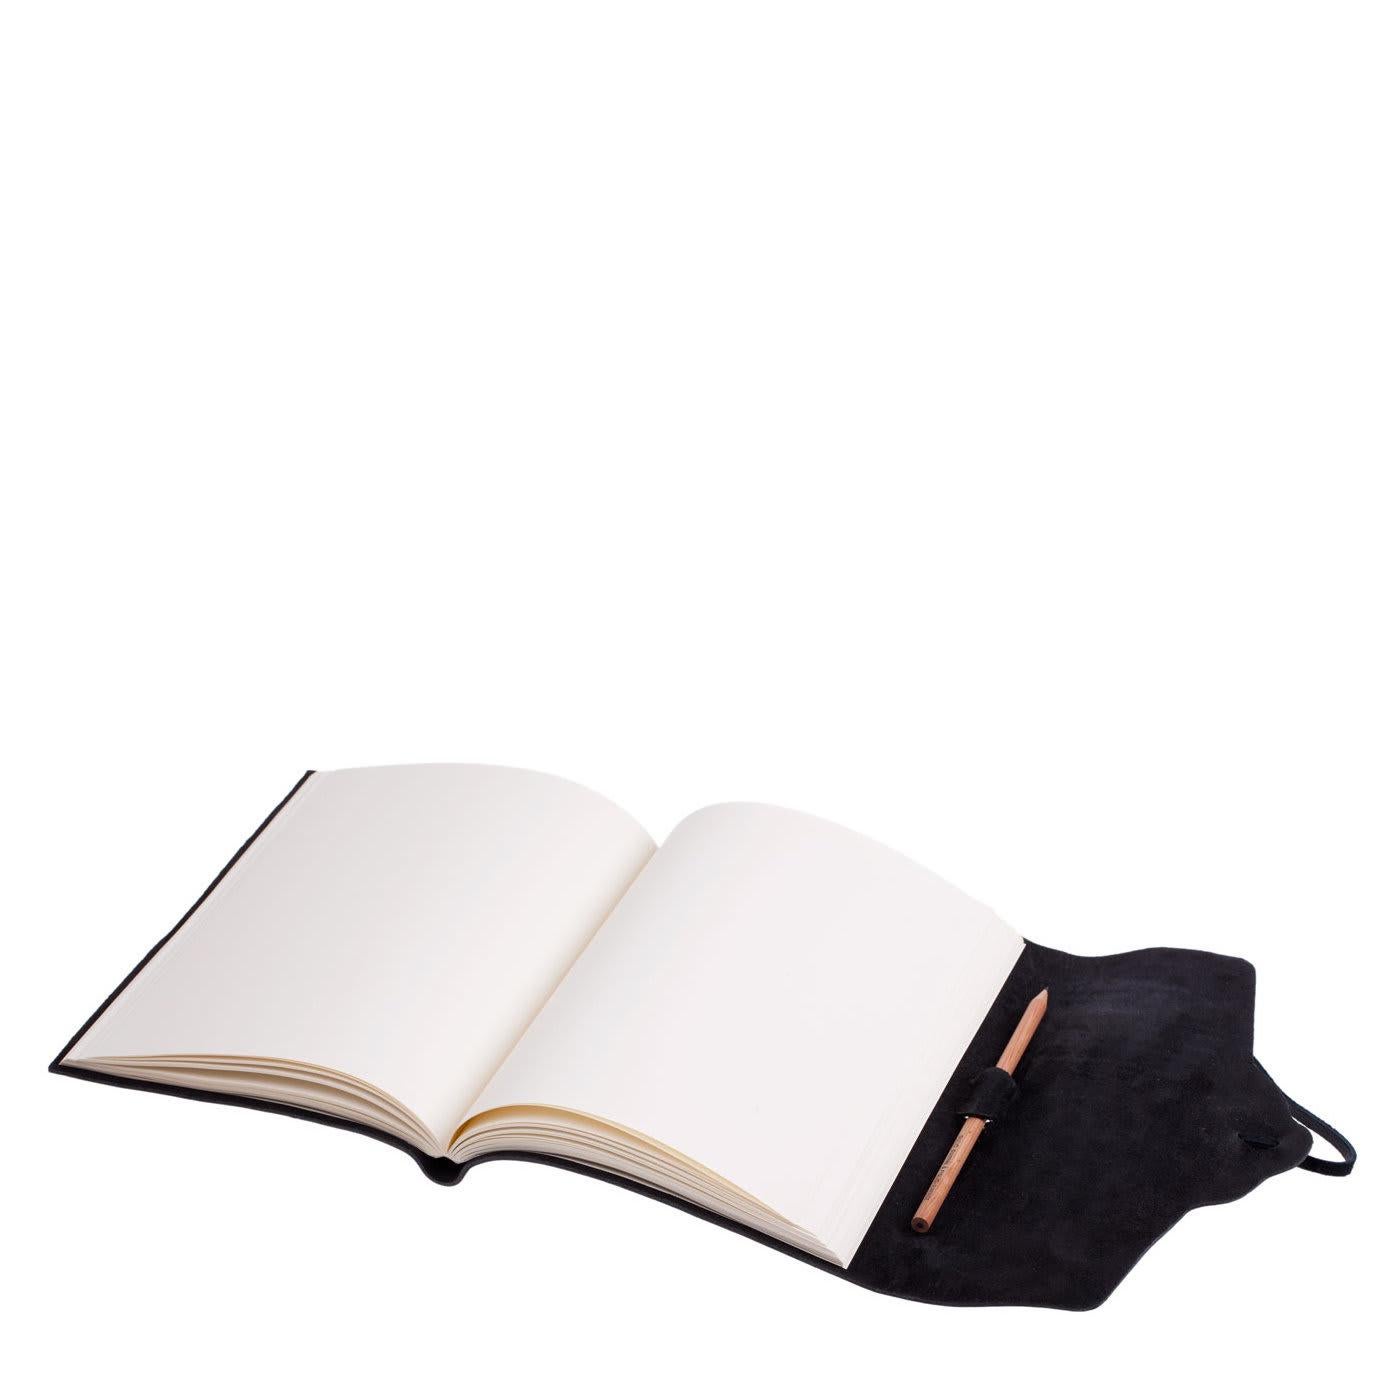 Classic notebook by Florentine bookbinder Giannini with a black soft leather cover treated using the ancient technique of vegetable tanning. Entirely handcrafted using century-old binding techniques, the notebook contains ivory paper suitable for